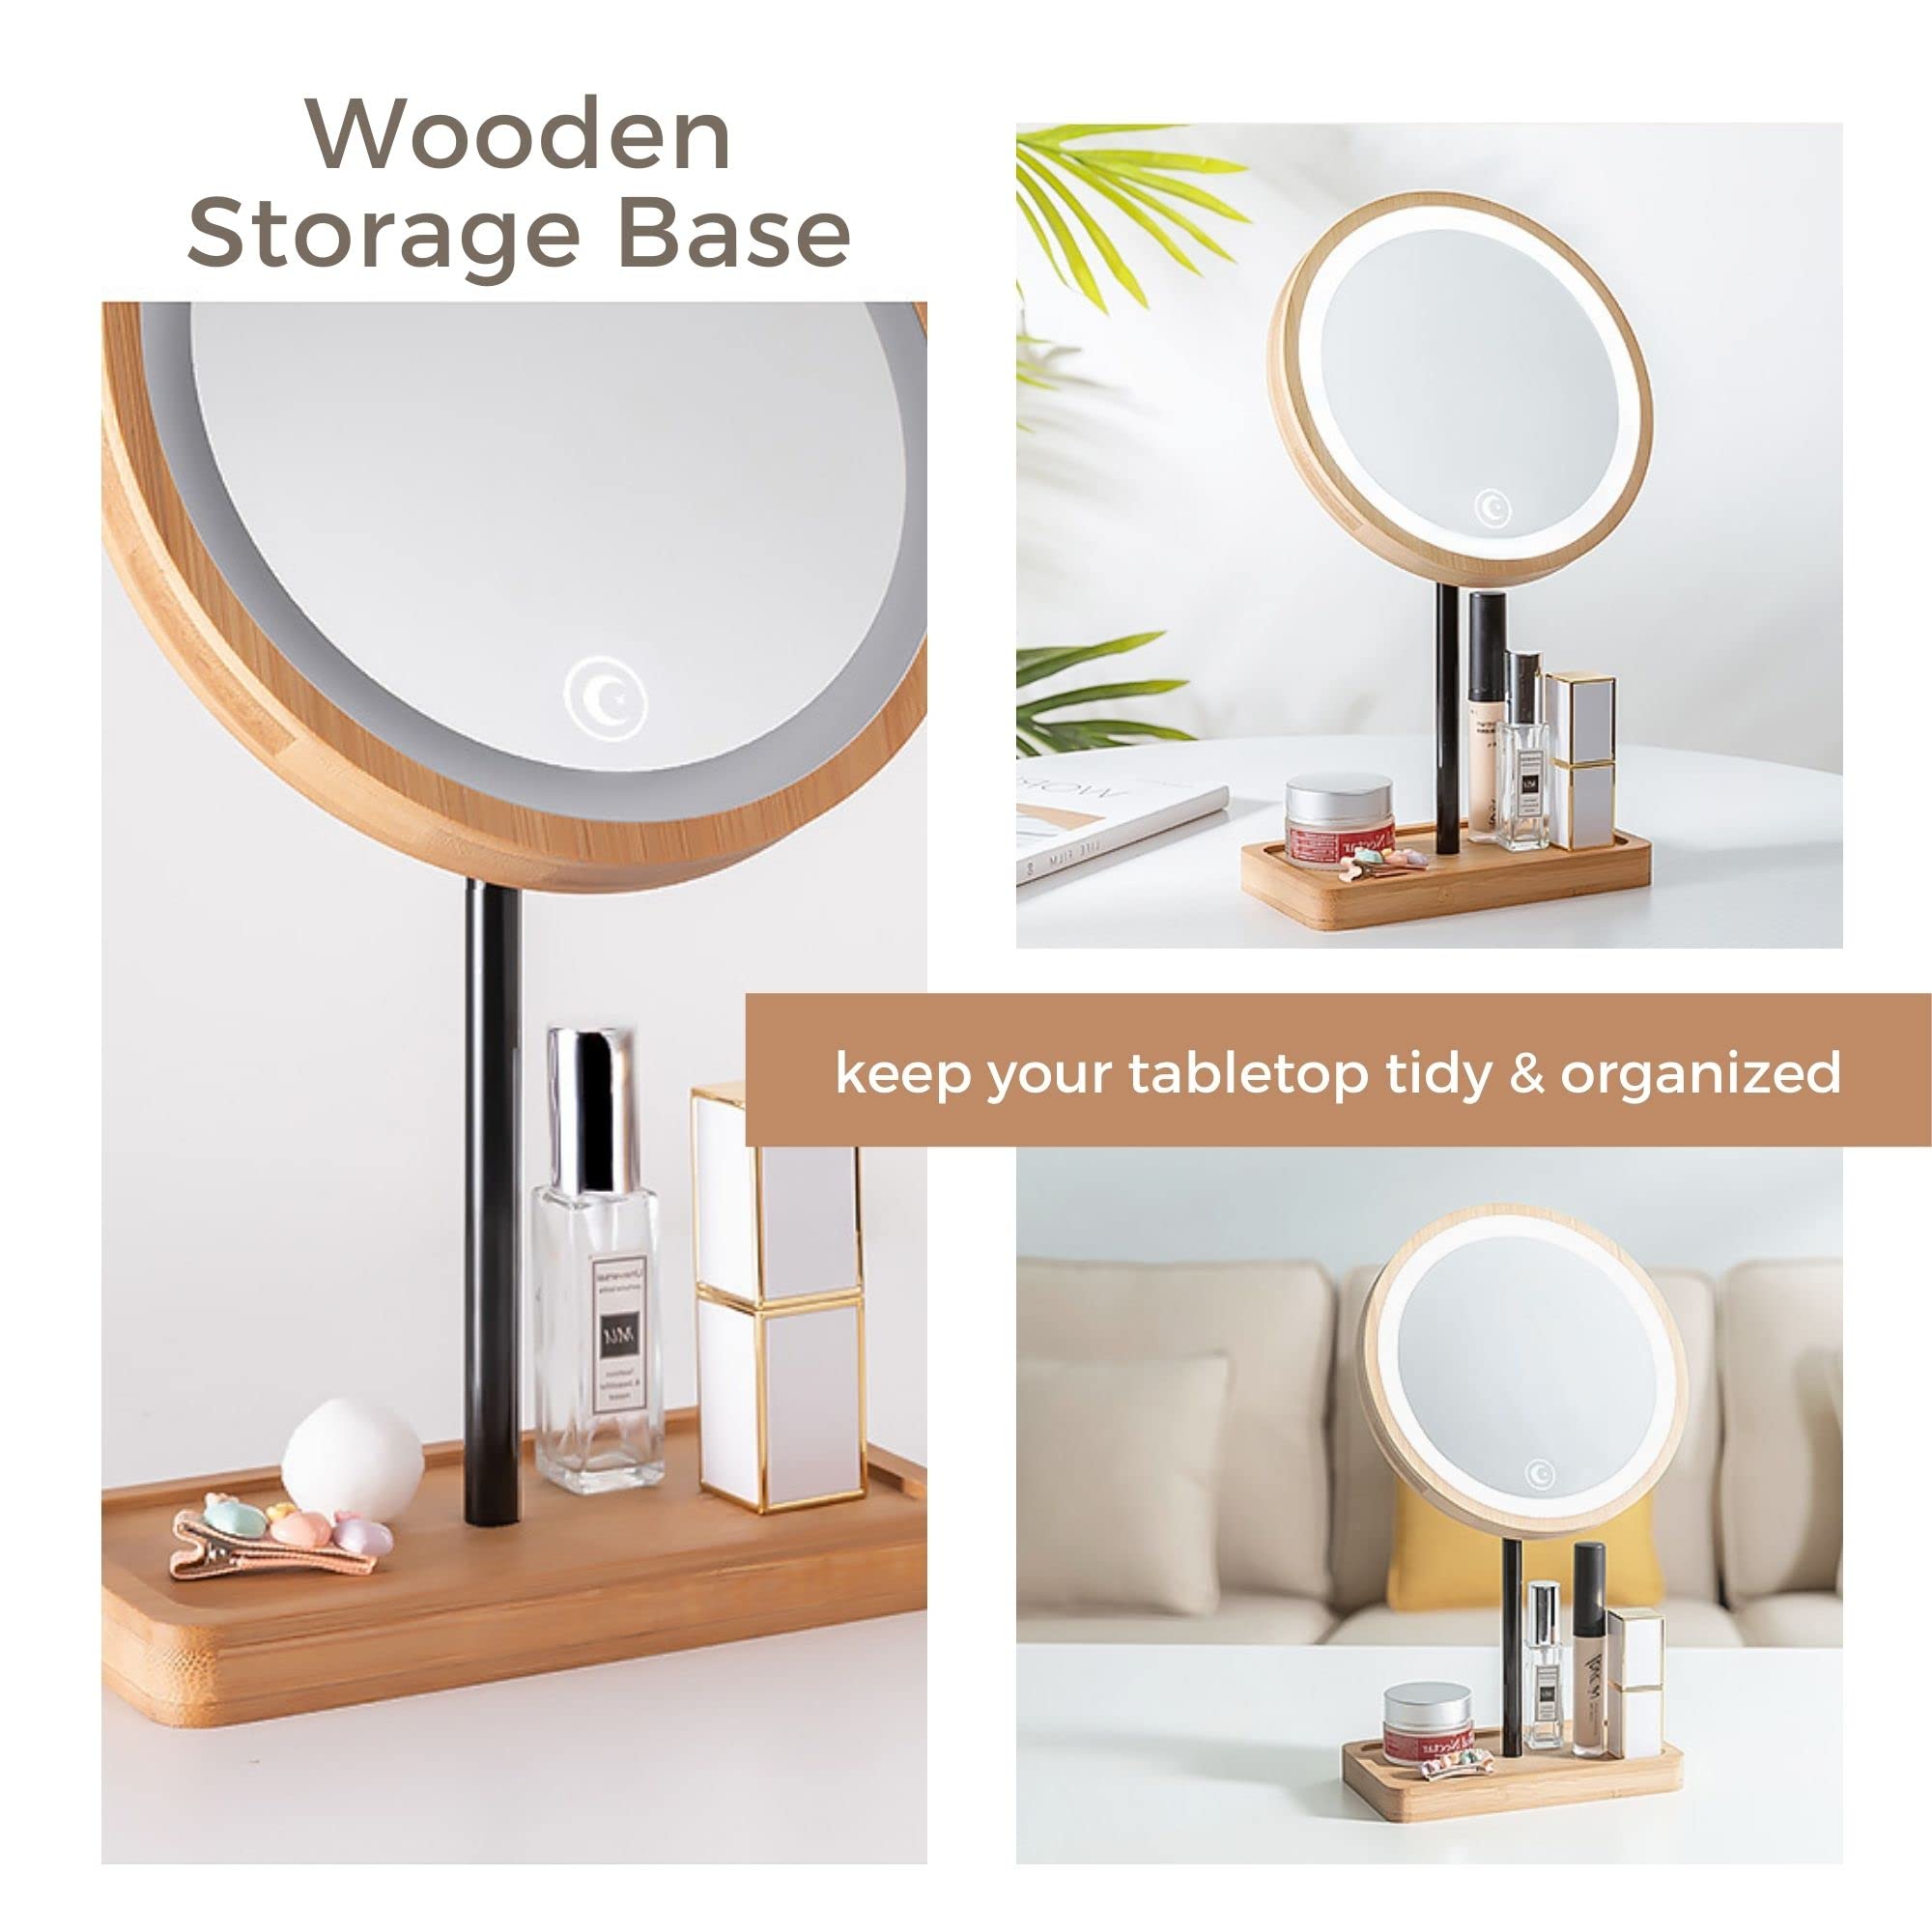 Kimikata LED Lighted Makeup Mirror Vanity Light Up Mirror with 3 Lights, Cordless USB Rechargeable Battery, Rotation, Small Bamboo Wood Beauty Storage Organizer, Tabletop Stand, Circular Ring Light